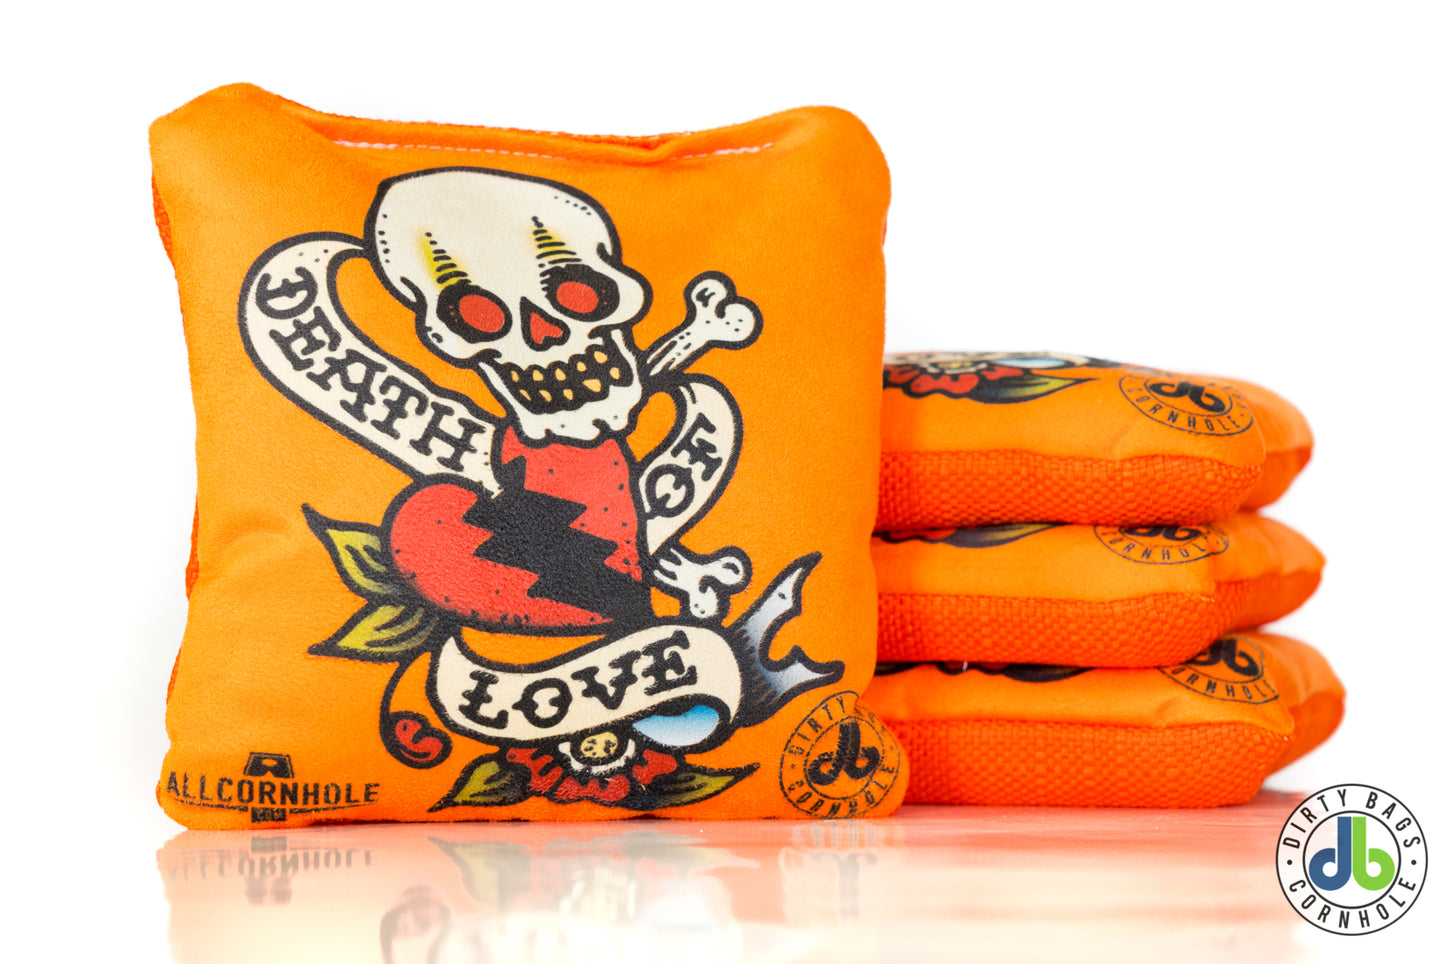 Slide Rite Bags - DBC Vintage Tattoo Collection - Set of 4